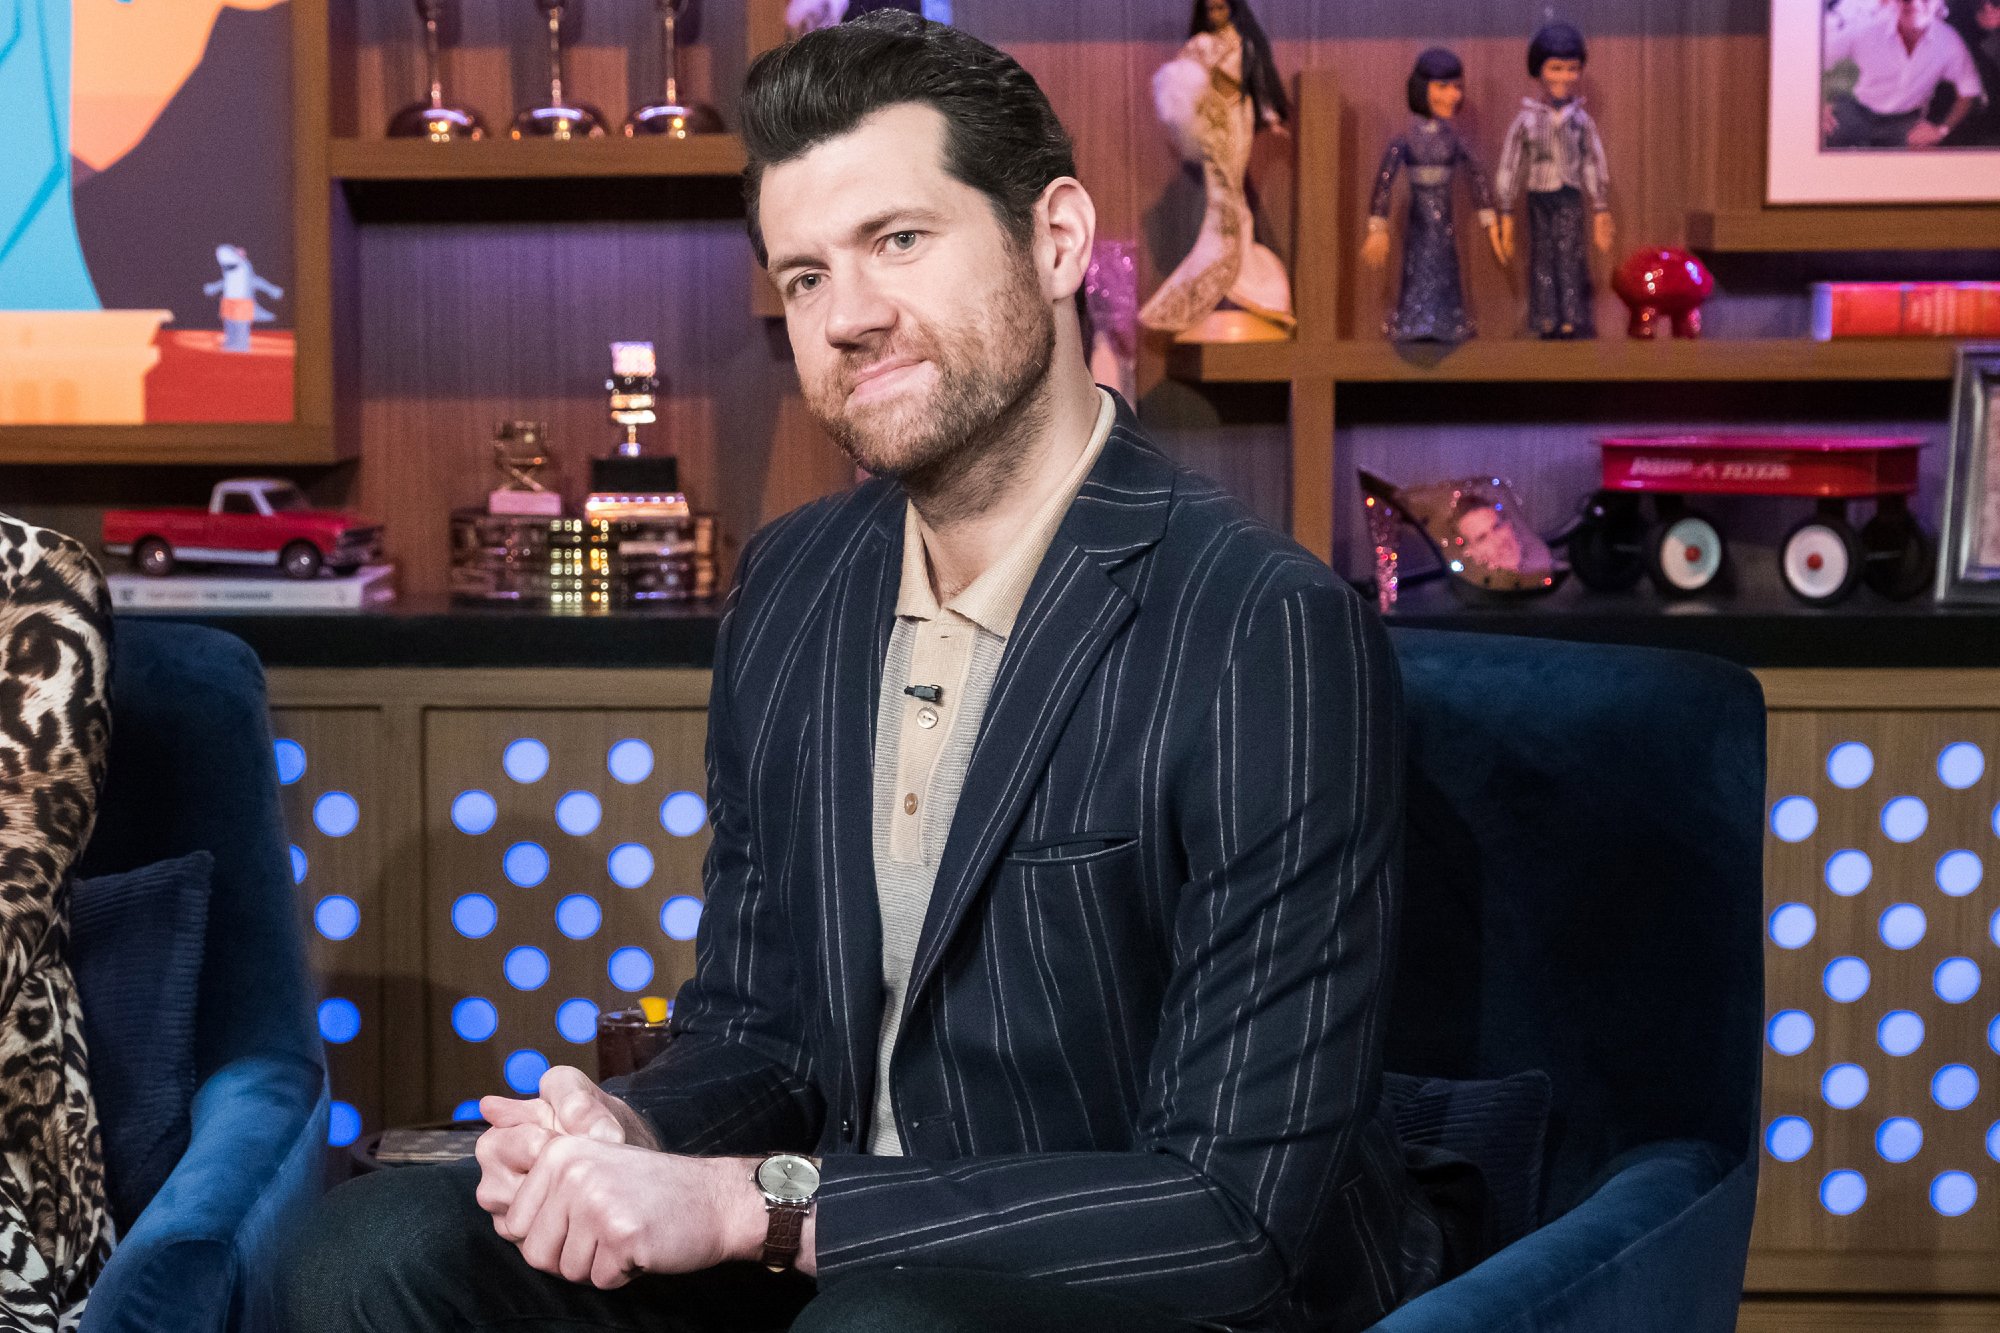 LGBTQ film 'Bros' star Billy Eichner sitting on a chair on 'Watch What Happens Live With Andy Cohen'